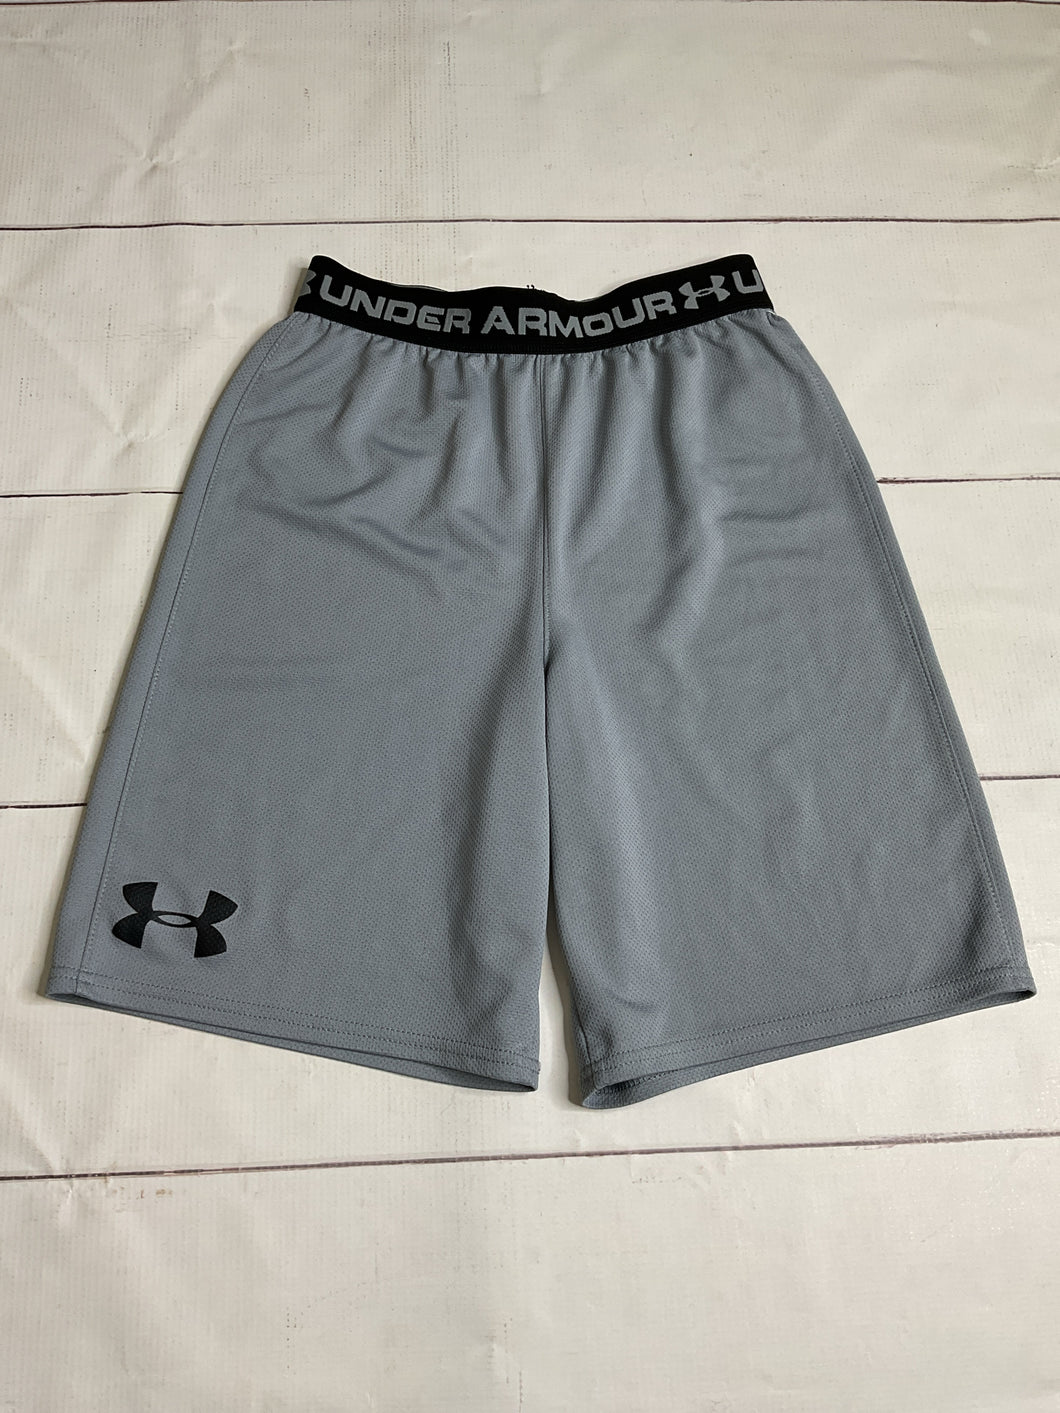 Under Armour Size 10 Shorts